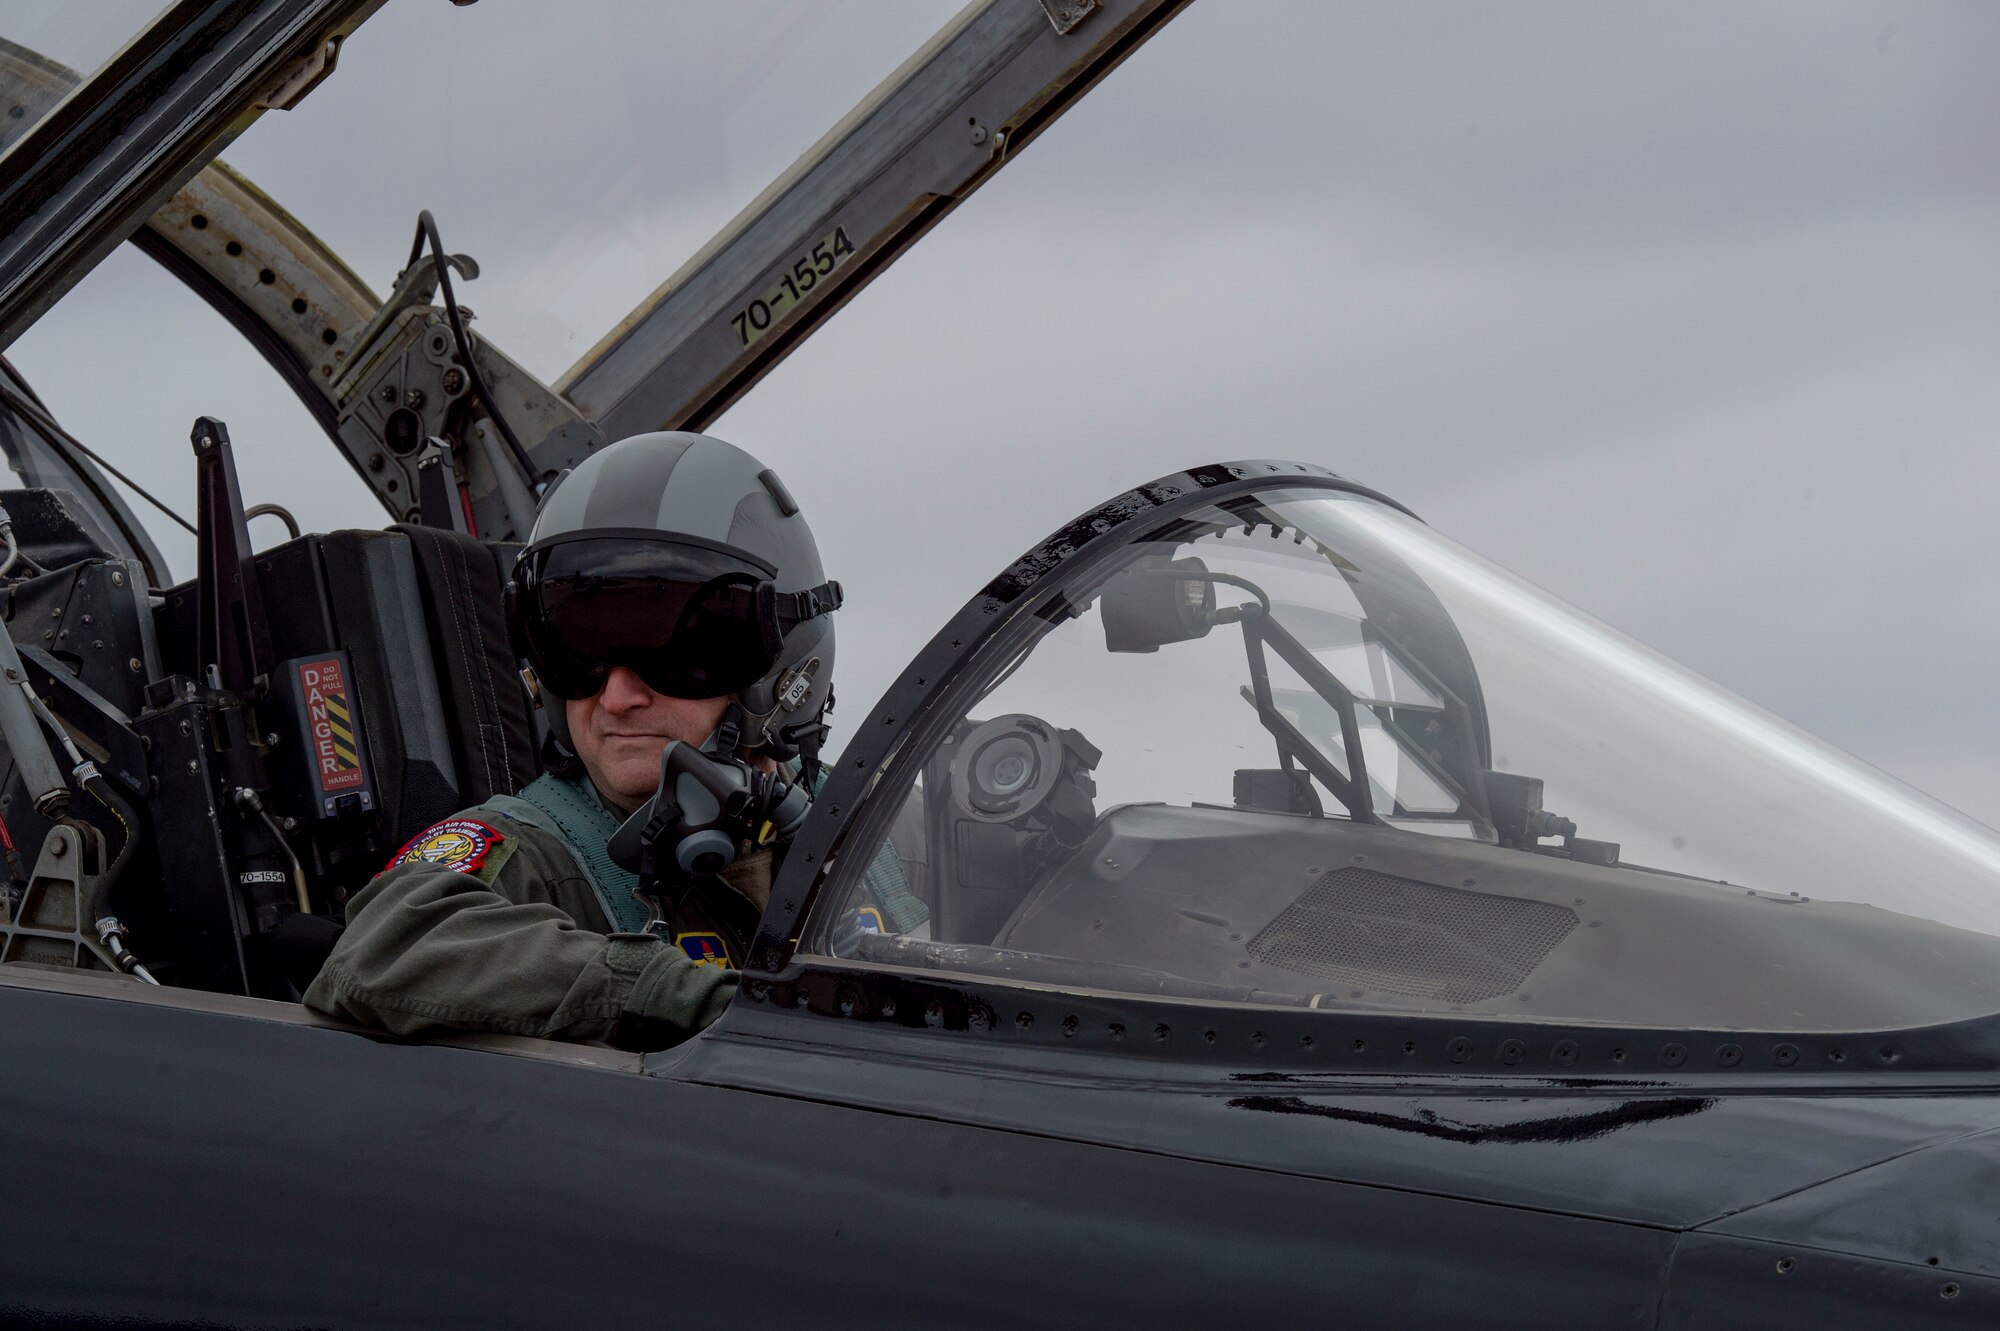 U.S. Air Force Maj. Gen. Phillip Stewart, 19th Air Force commander, taxis a T-38 Talon assigned to the 12th Flying Training Wing at Randolph Air Force Base, Texas, during 19th Air Force Commander’s Call and Fly-In at Holloman Air Force Base, New Mexico, March 3, 2023.